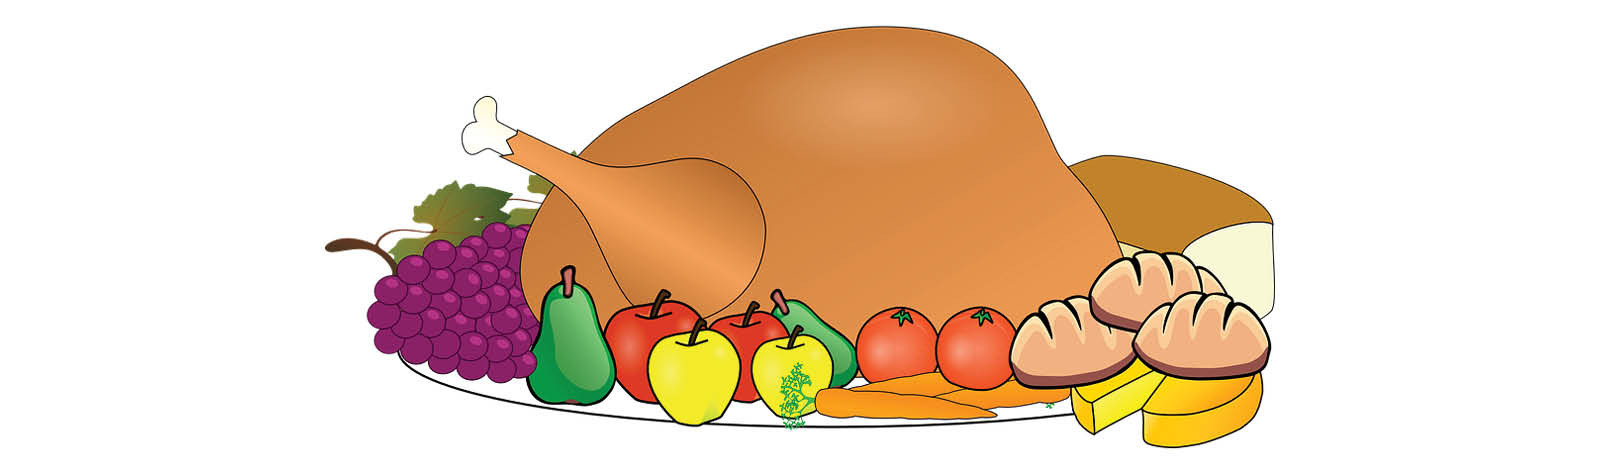 Turkey Hotline Thanksgiving
 What Does a Turkey Hotline Have to do with Distinct